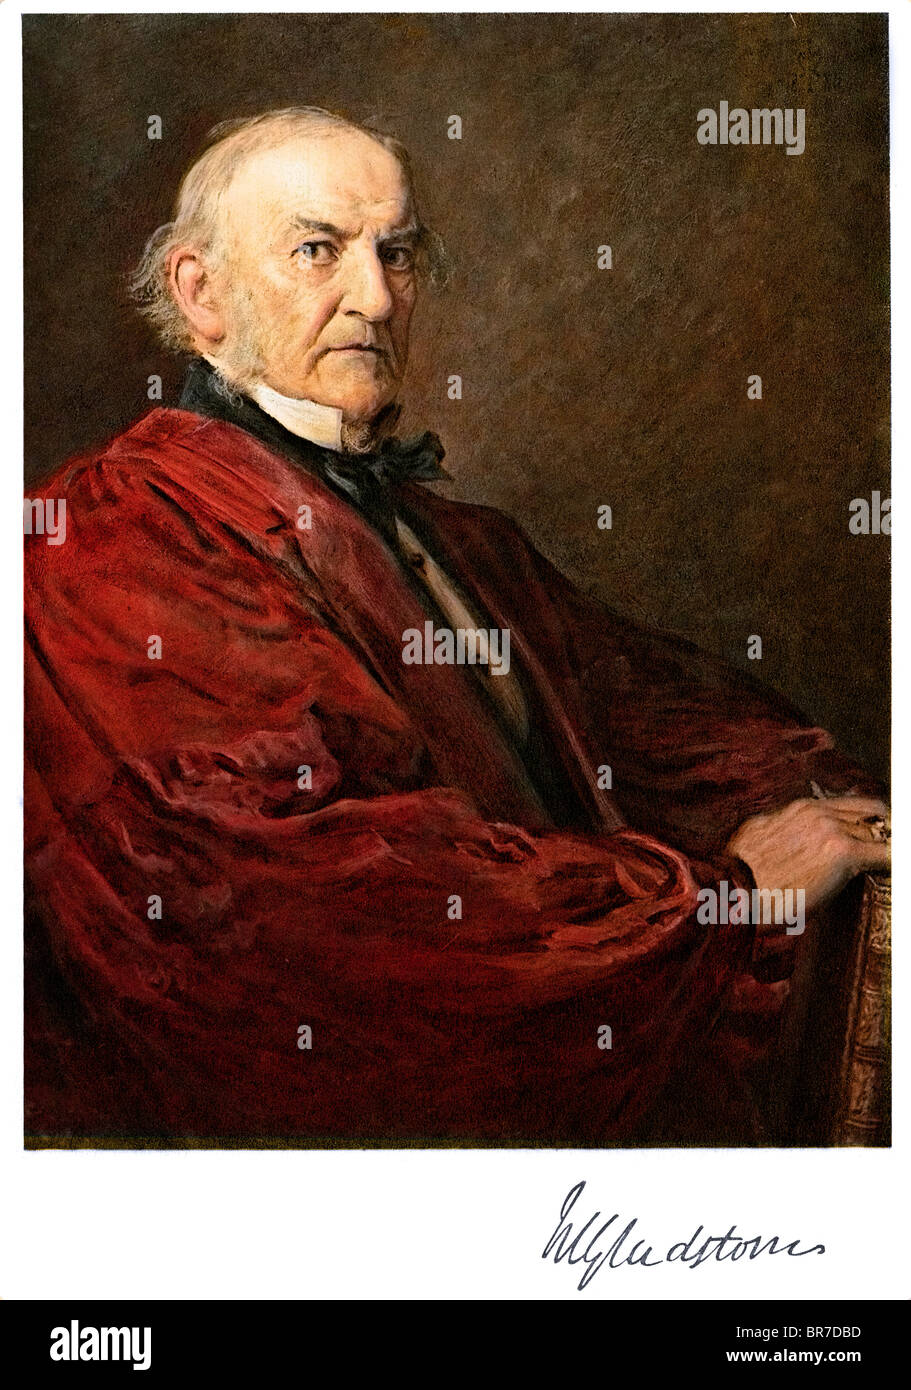 William Ewart Gladstone British Liberal statesman. In a career lasting over sixty years, he served as Prime Minister four times. Stock Photo